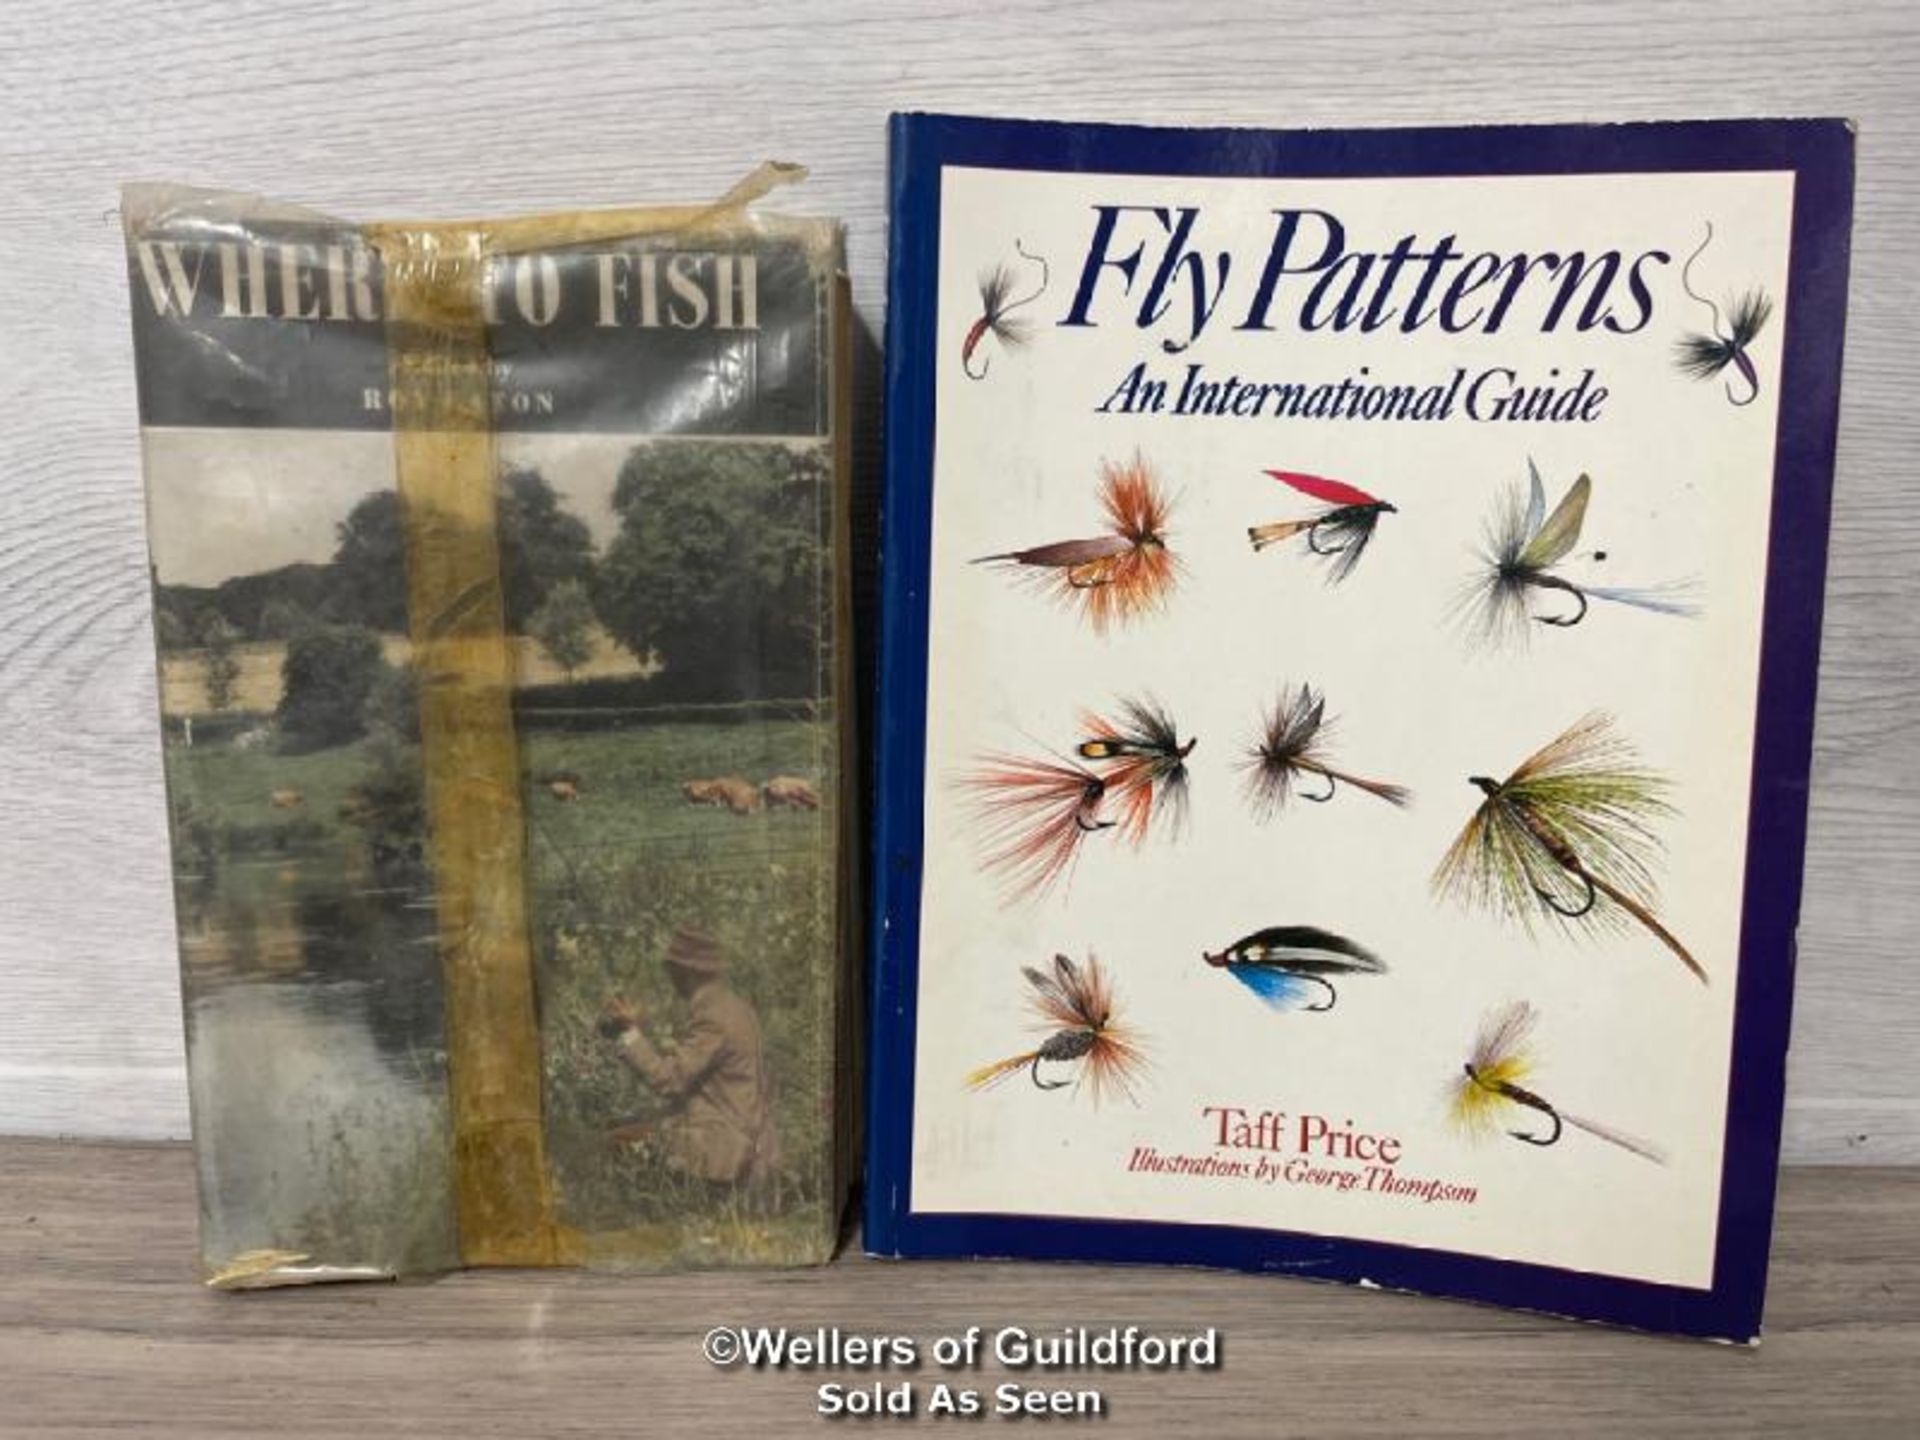 TWO BOOKS "WHERE TO FISH" BY ROY EATON AND "FLY PATTERNS" BY TAFF PRICE